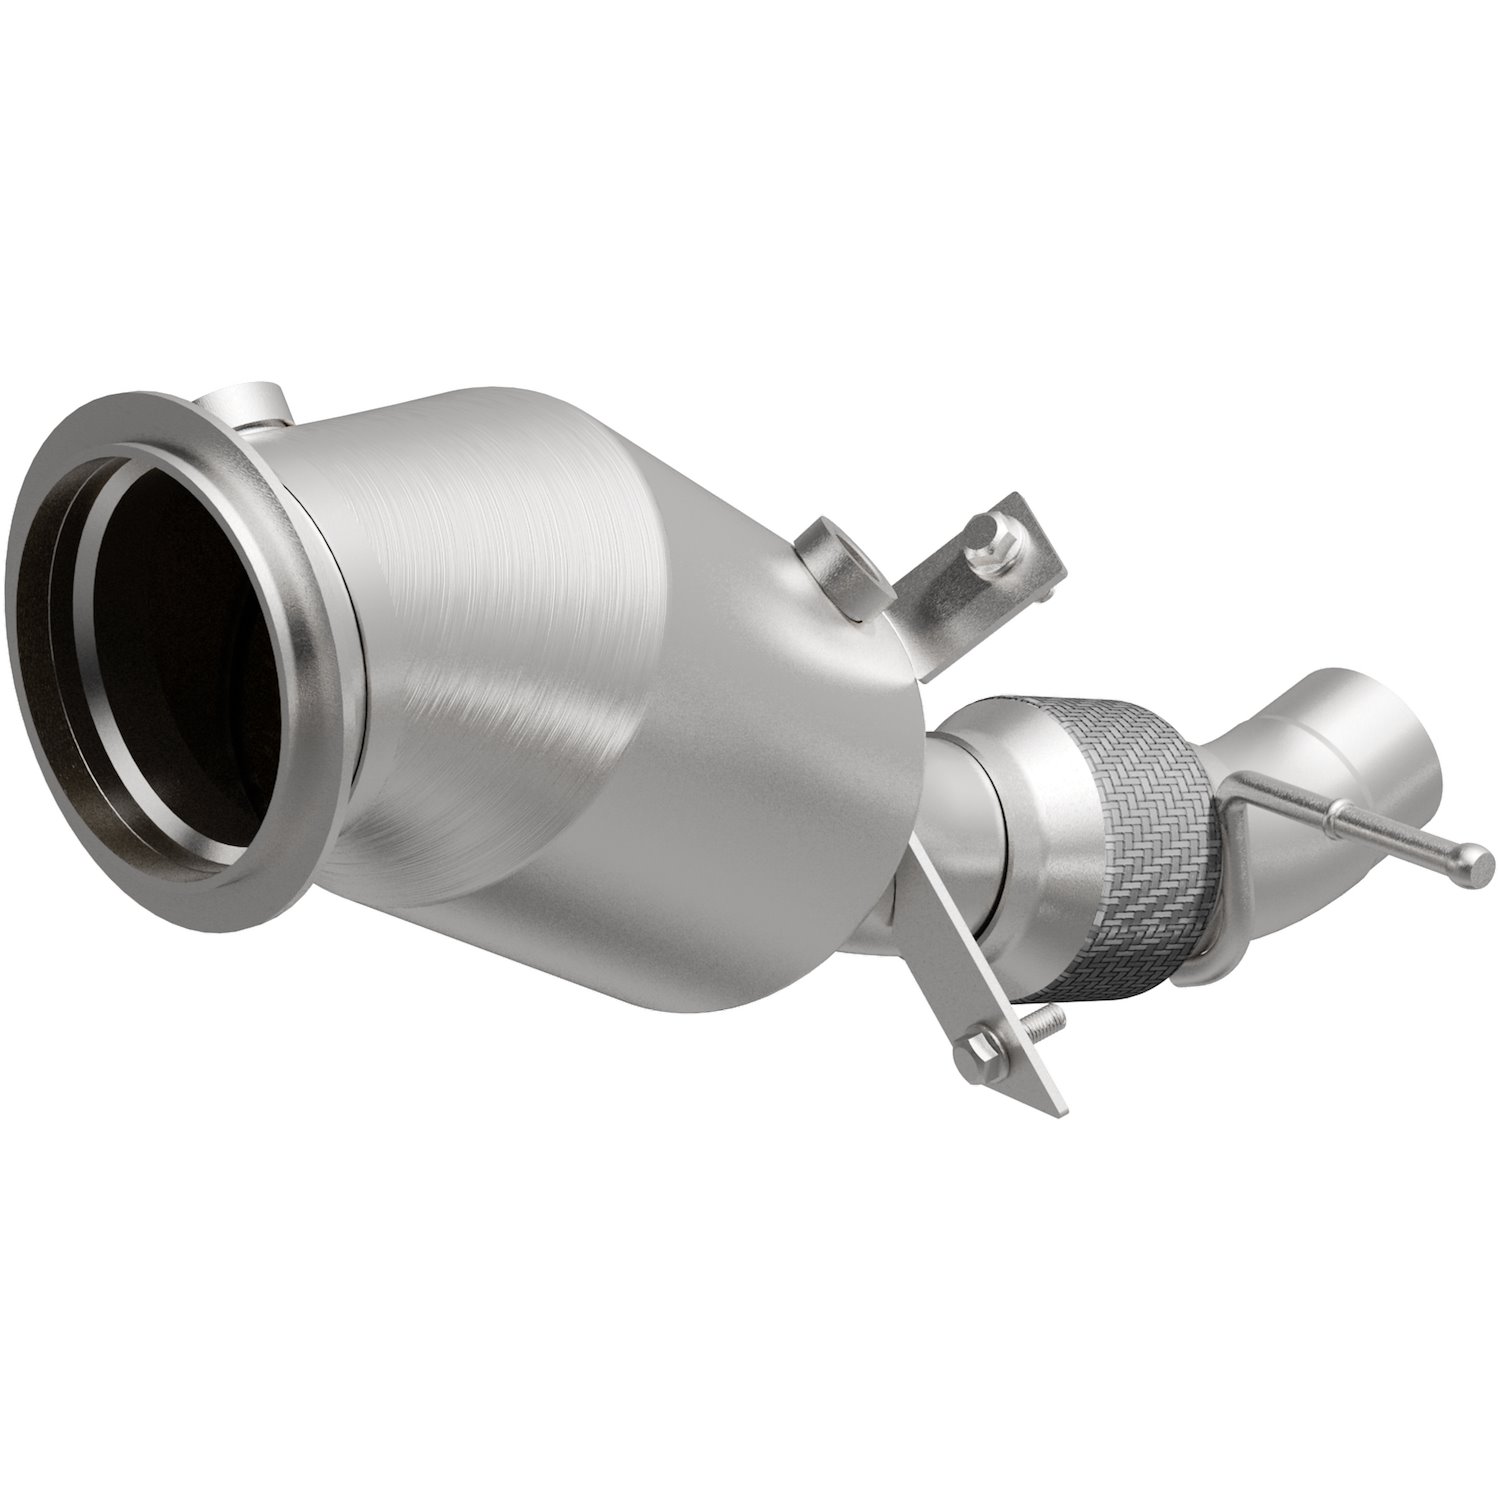 OEM Grade Federal / EPA Compliant Direct-Fit Catalytic Converter 52266